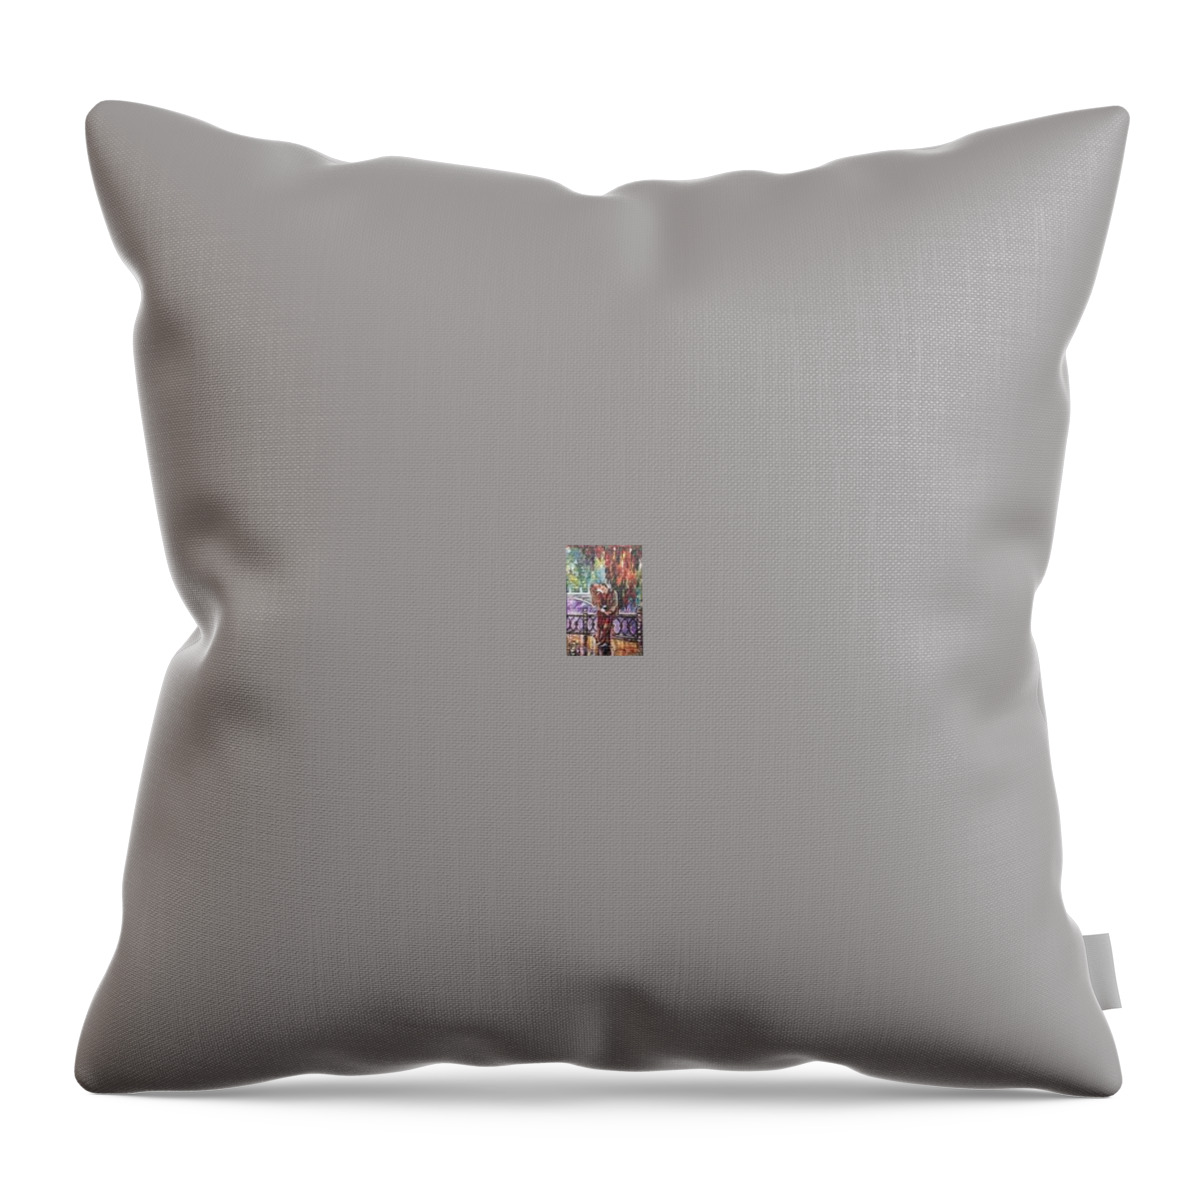 Love Throw Pillow featuring the painting Love story on a rainy day by Sam Shaker